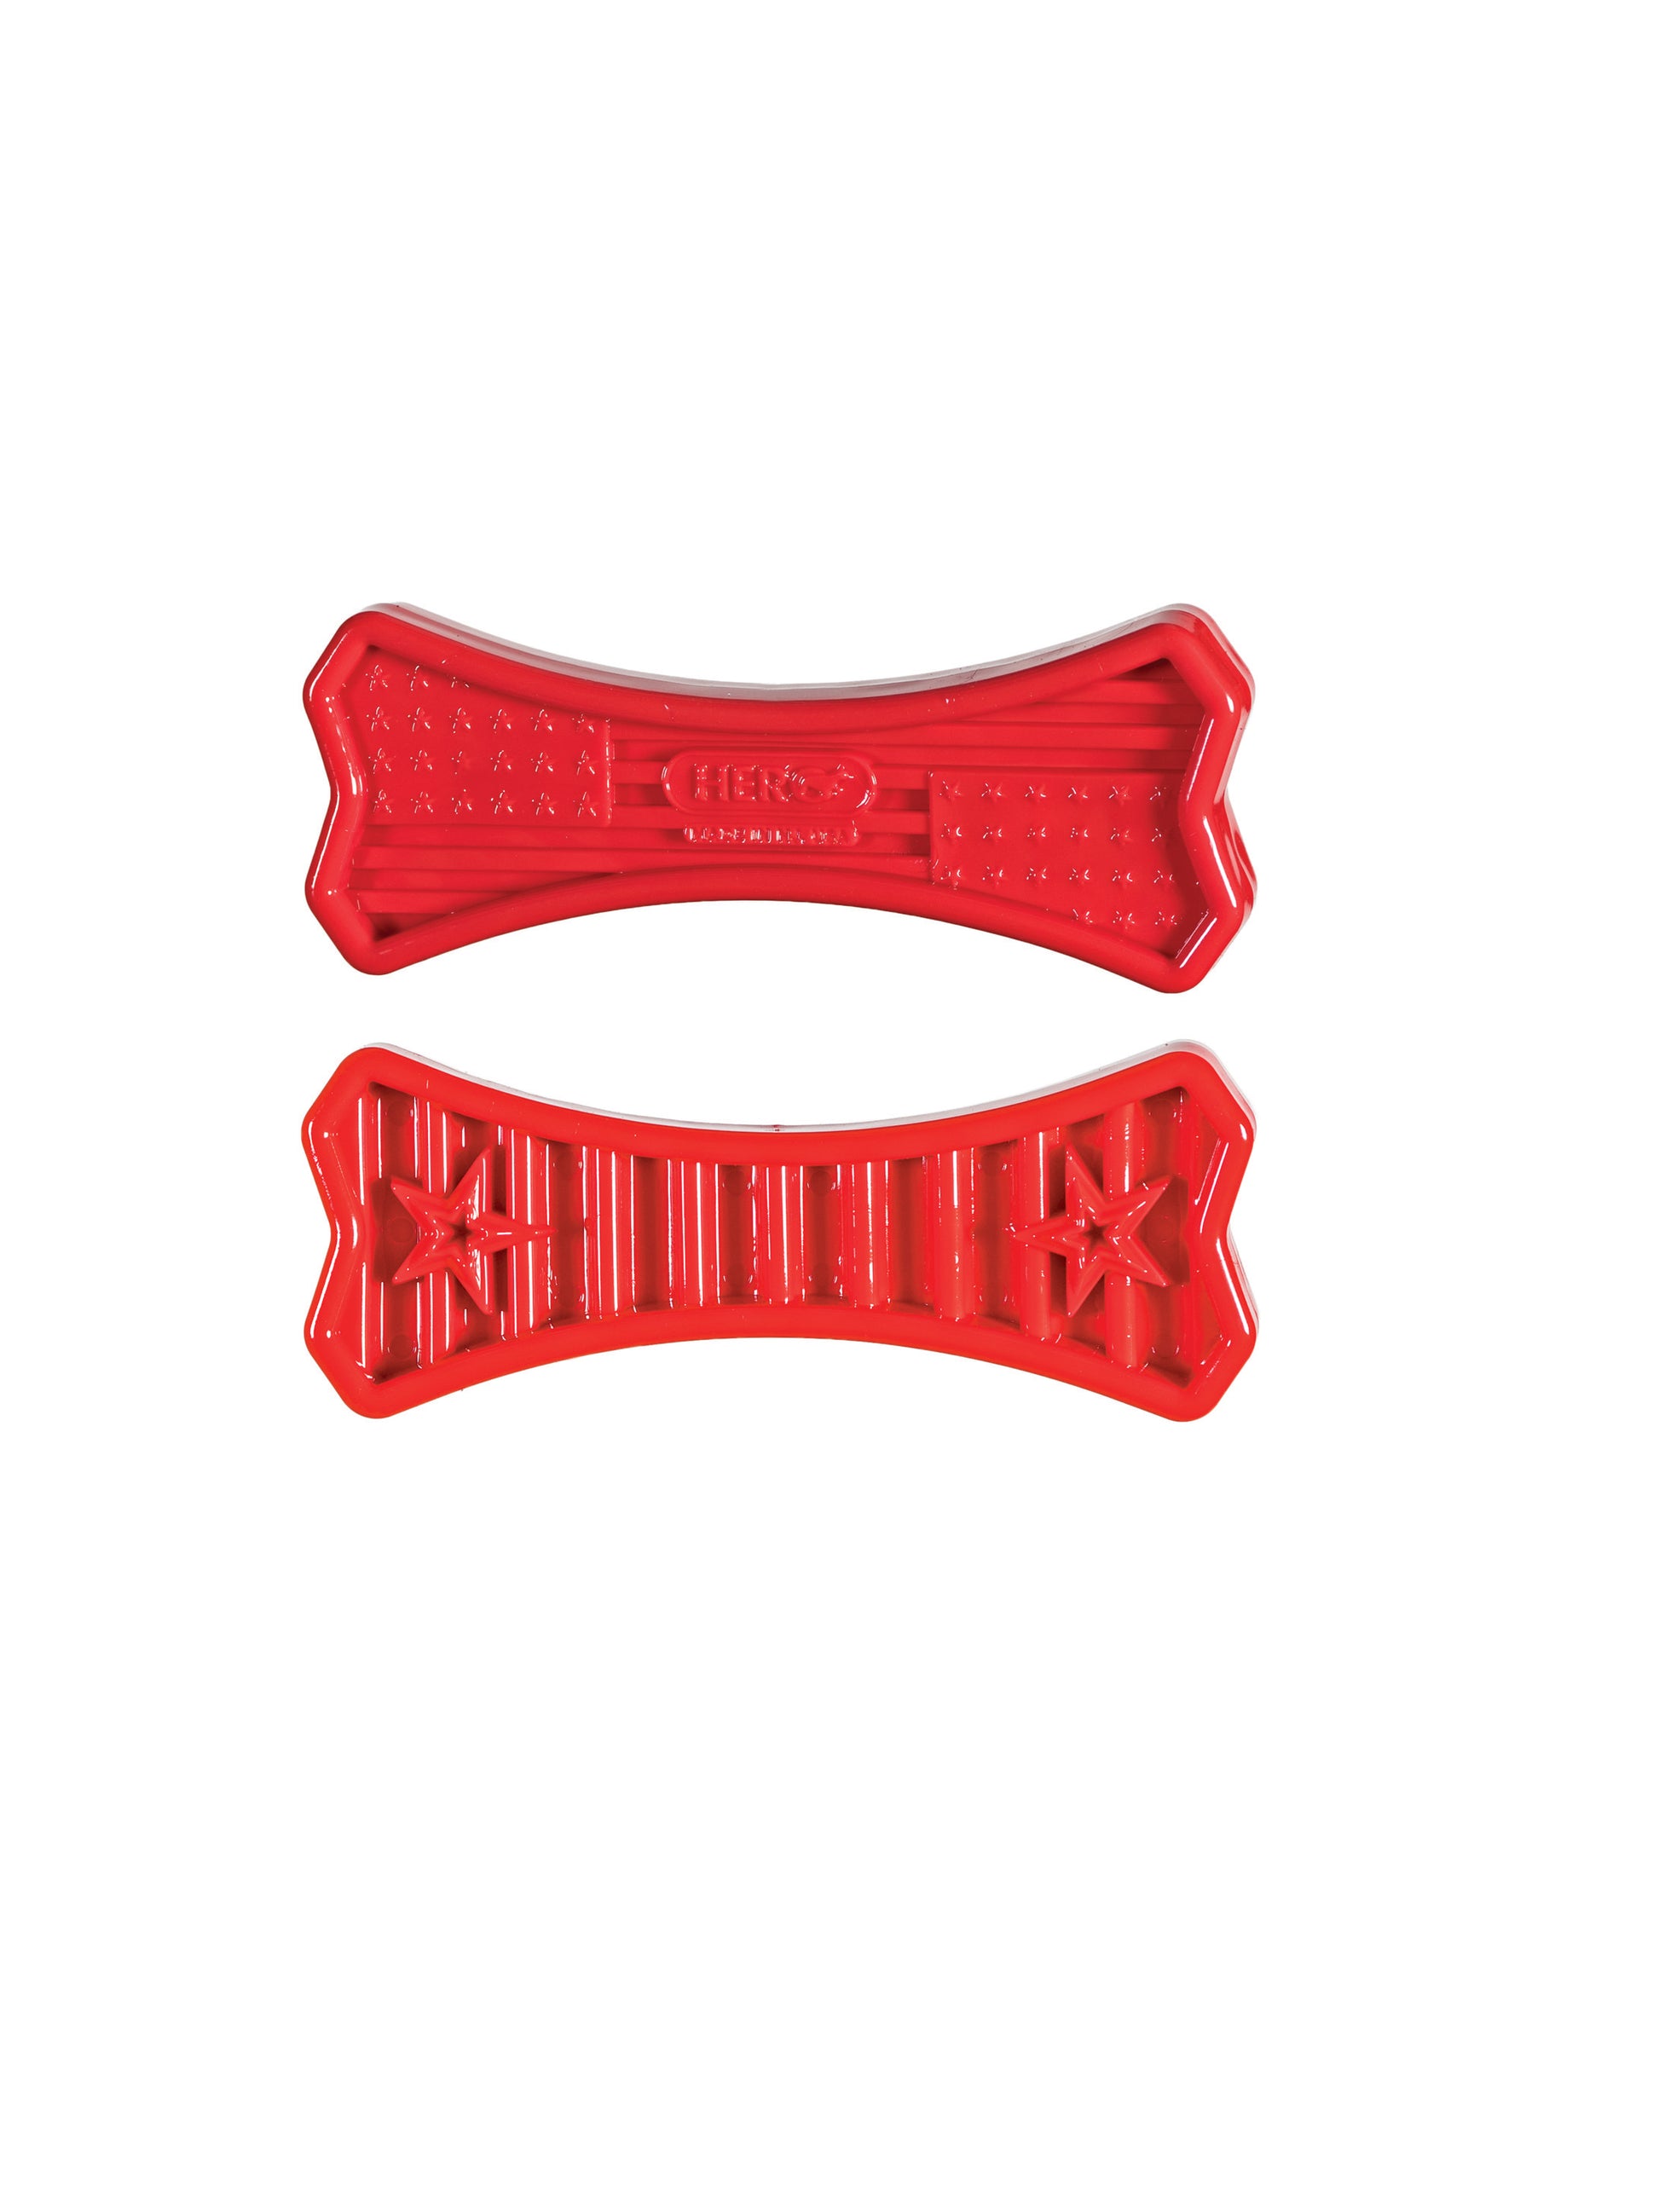 Red small bone toy for dogs